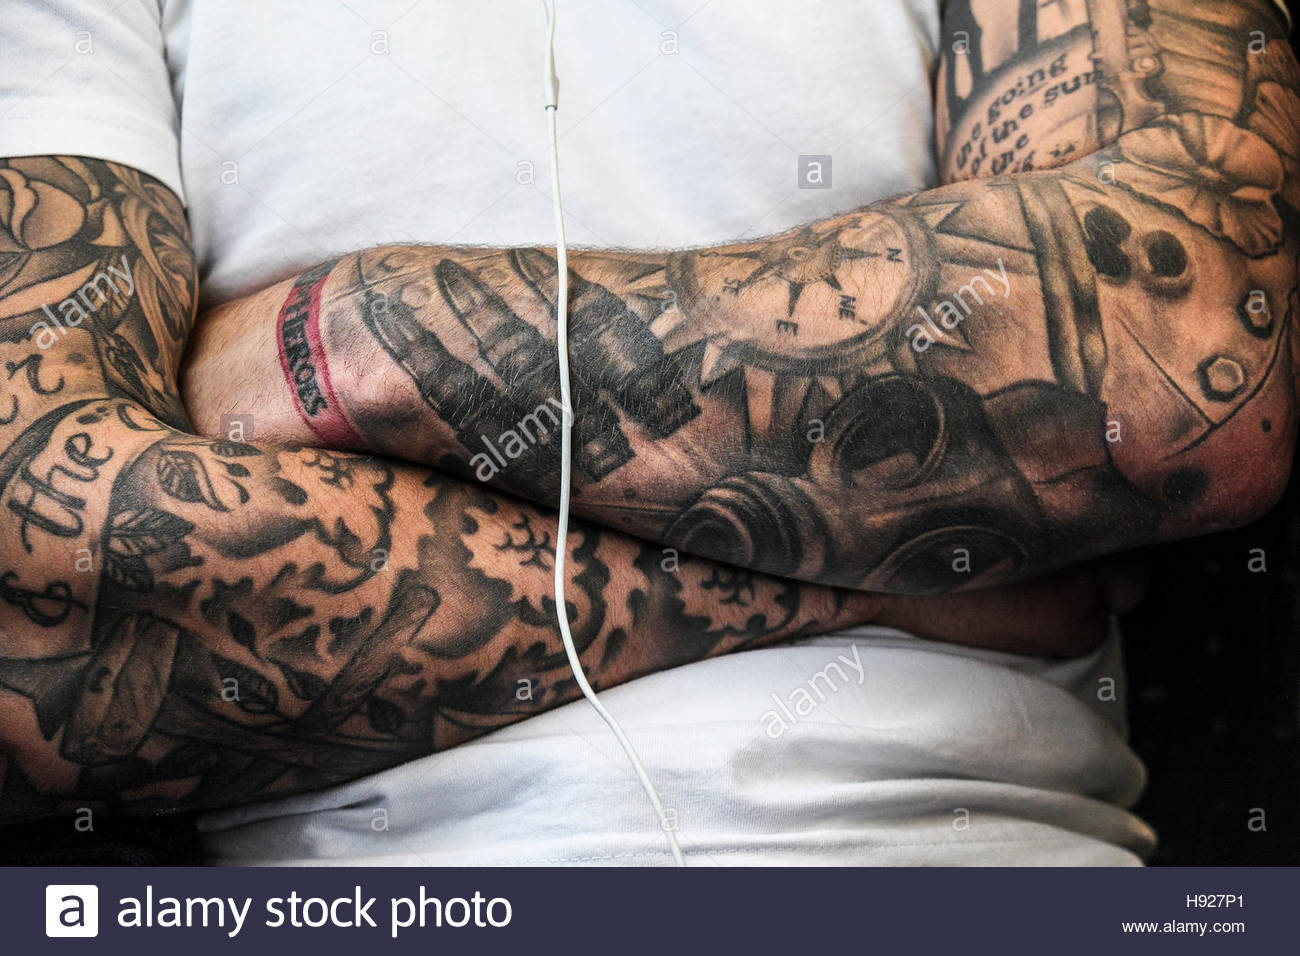 A Man With Heavily Tattooed Arms Stock Photo 126054489 Alamy within sizing 1300 X 956